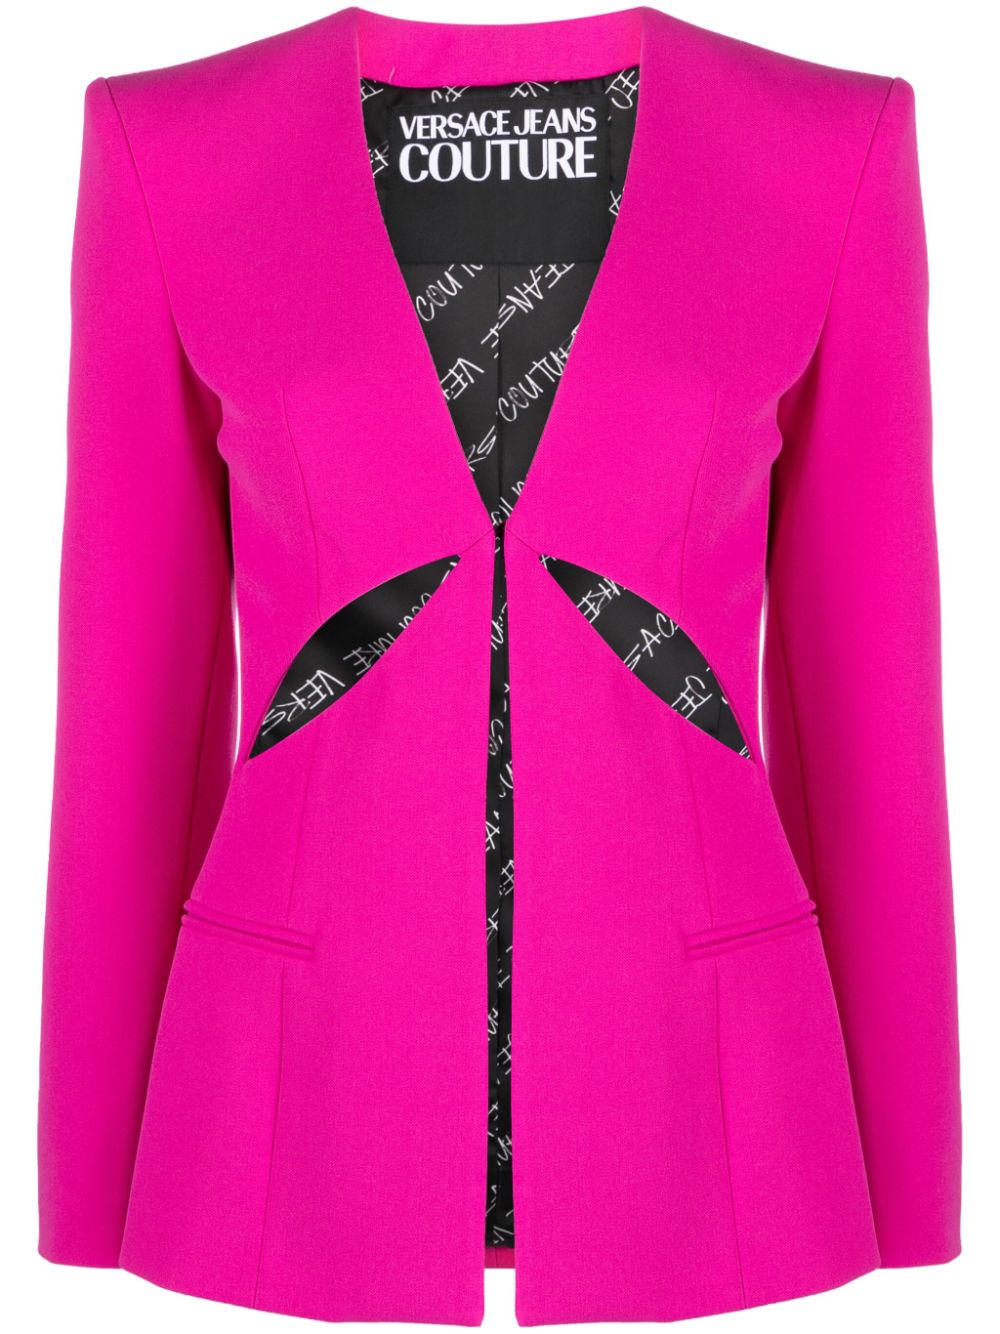 Versace Jeans Couture slashed single-breasted blazer - Pink von Versace Jeans Couture